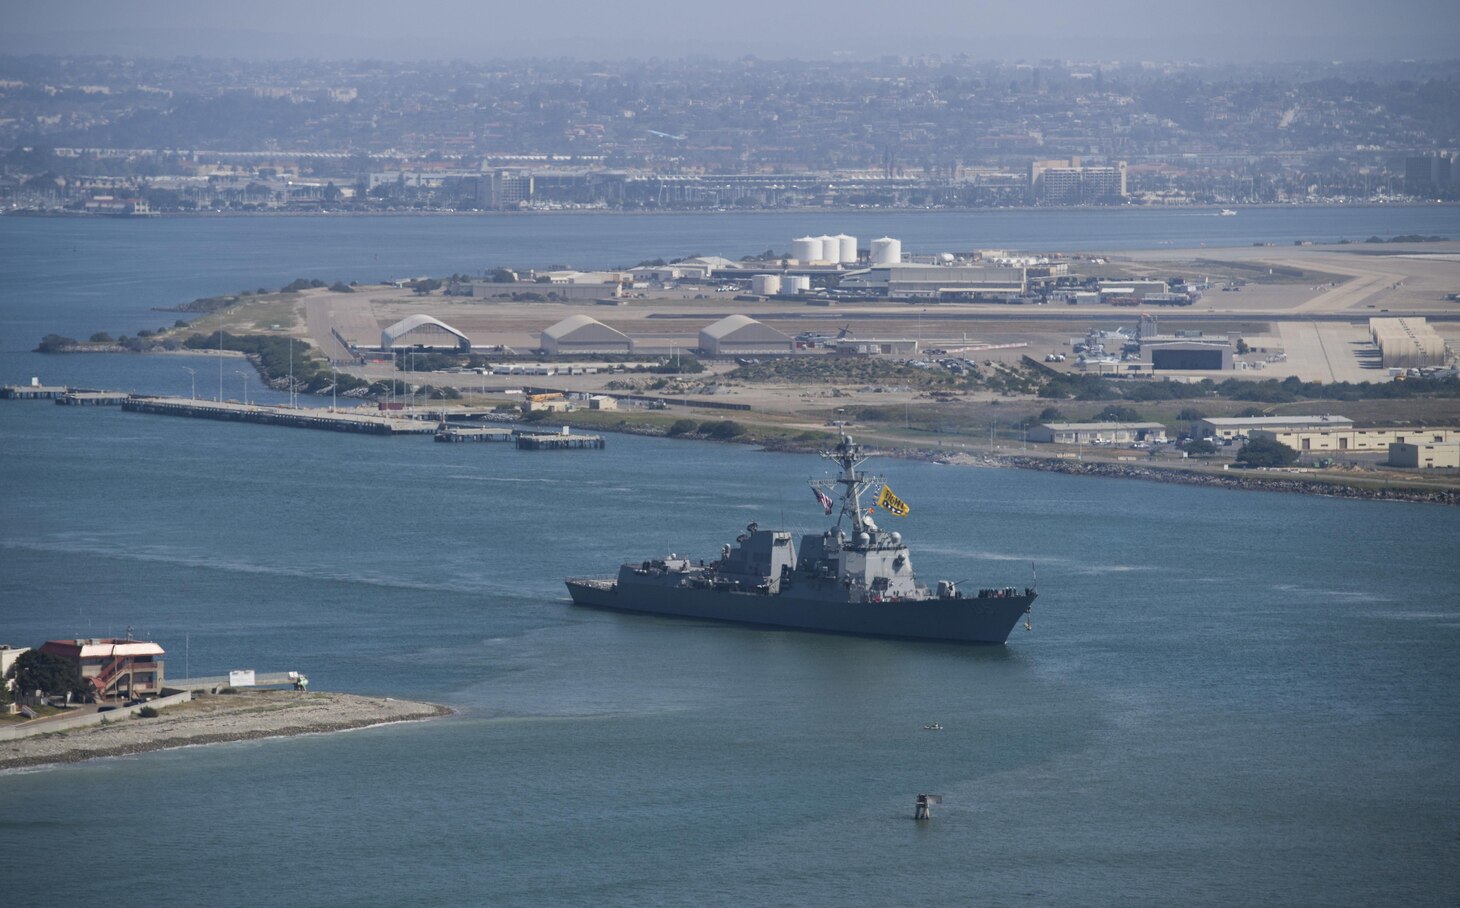 Arleigh Burke-class guided-missile destroyer USS Dewey (DDG 105) exits the harbor as part of the Sterett-Dewey Surface Action Group (SAG). The Sterett-Dewey SAG is the third deploying group operating under the command and control construct called 3rd Fleet Forward, March 31. 2017. The first iteration in recent history occurred in 2016 with the Pacific Surface Action Group (PACSAG) deployment and was further executed with the January 2017 deployment of the Carl Vinson Strike Group. 